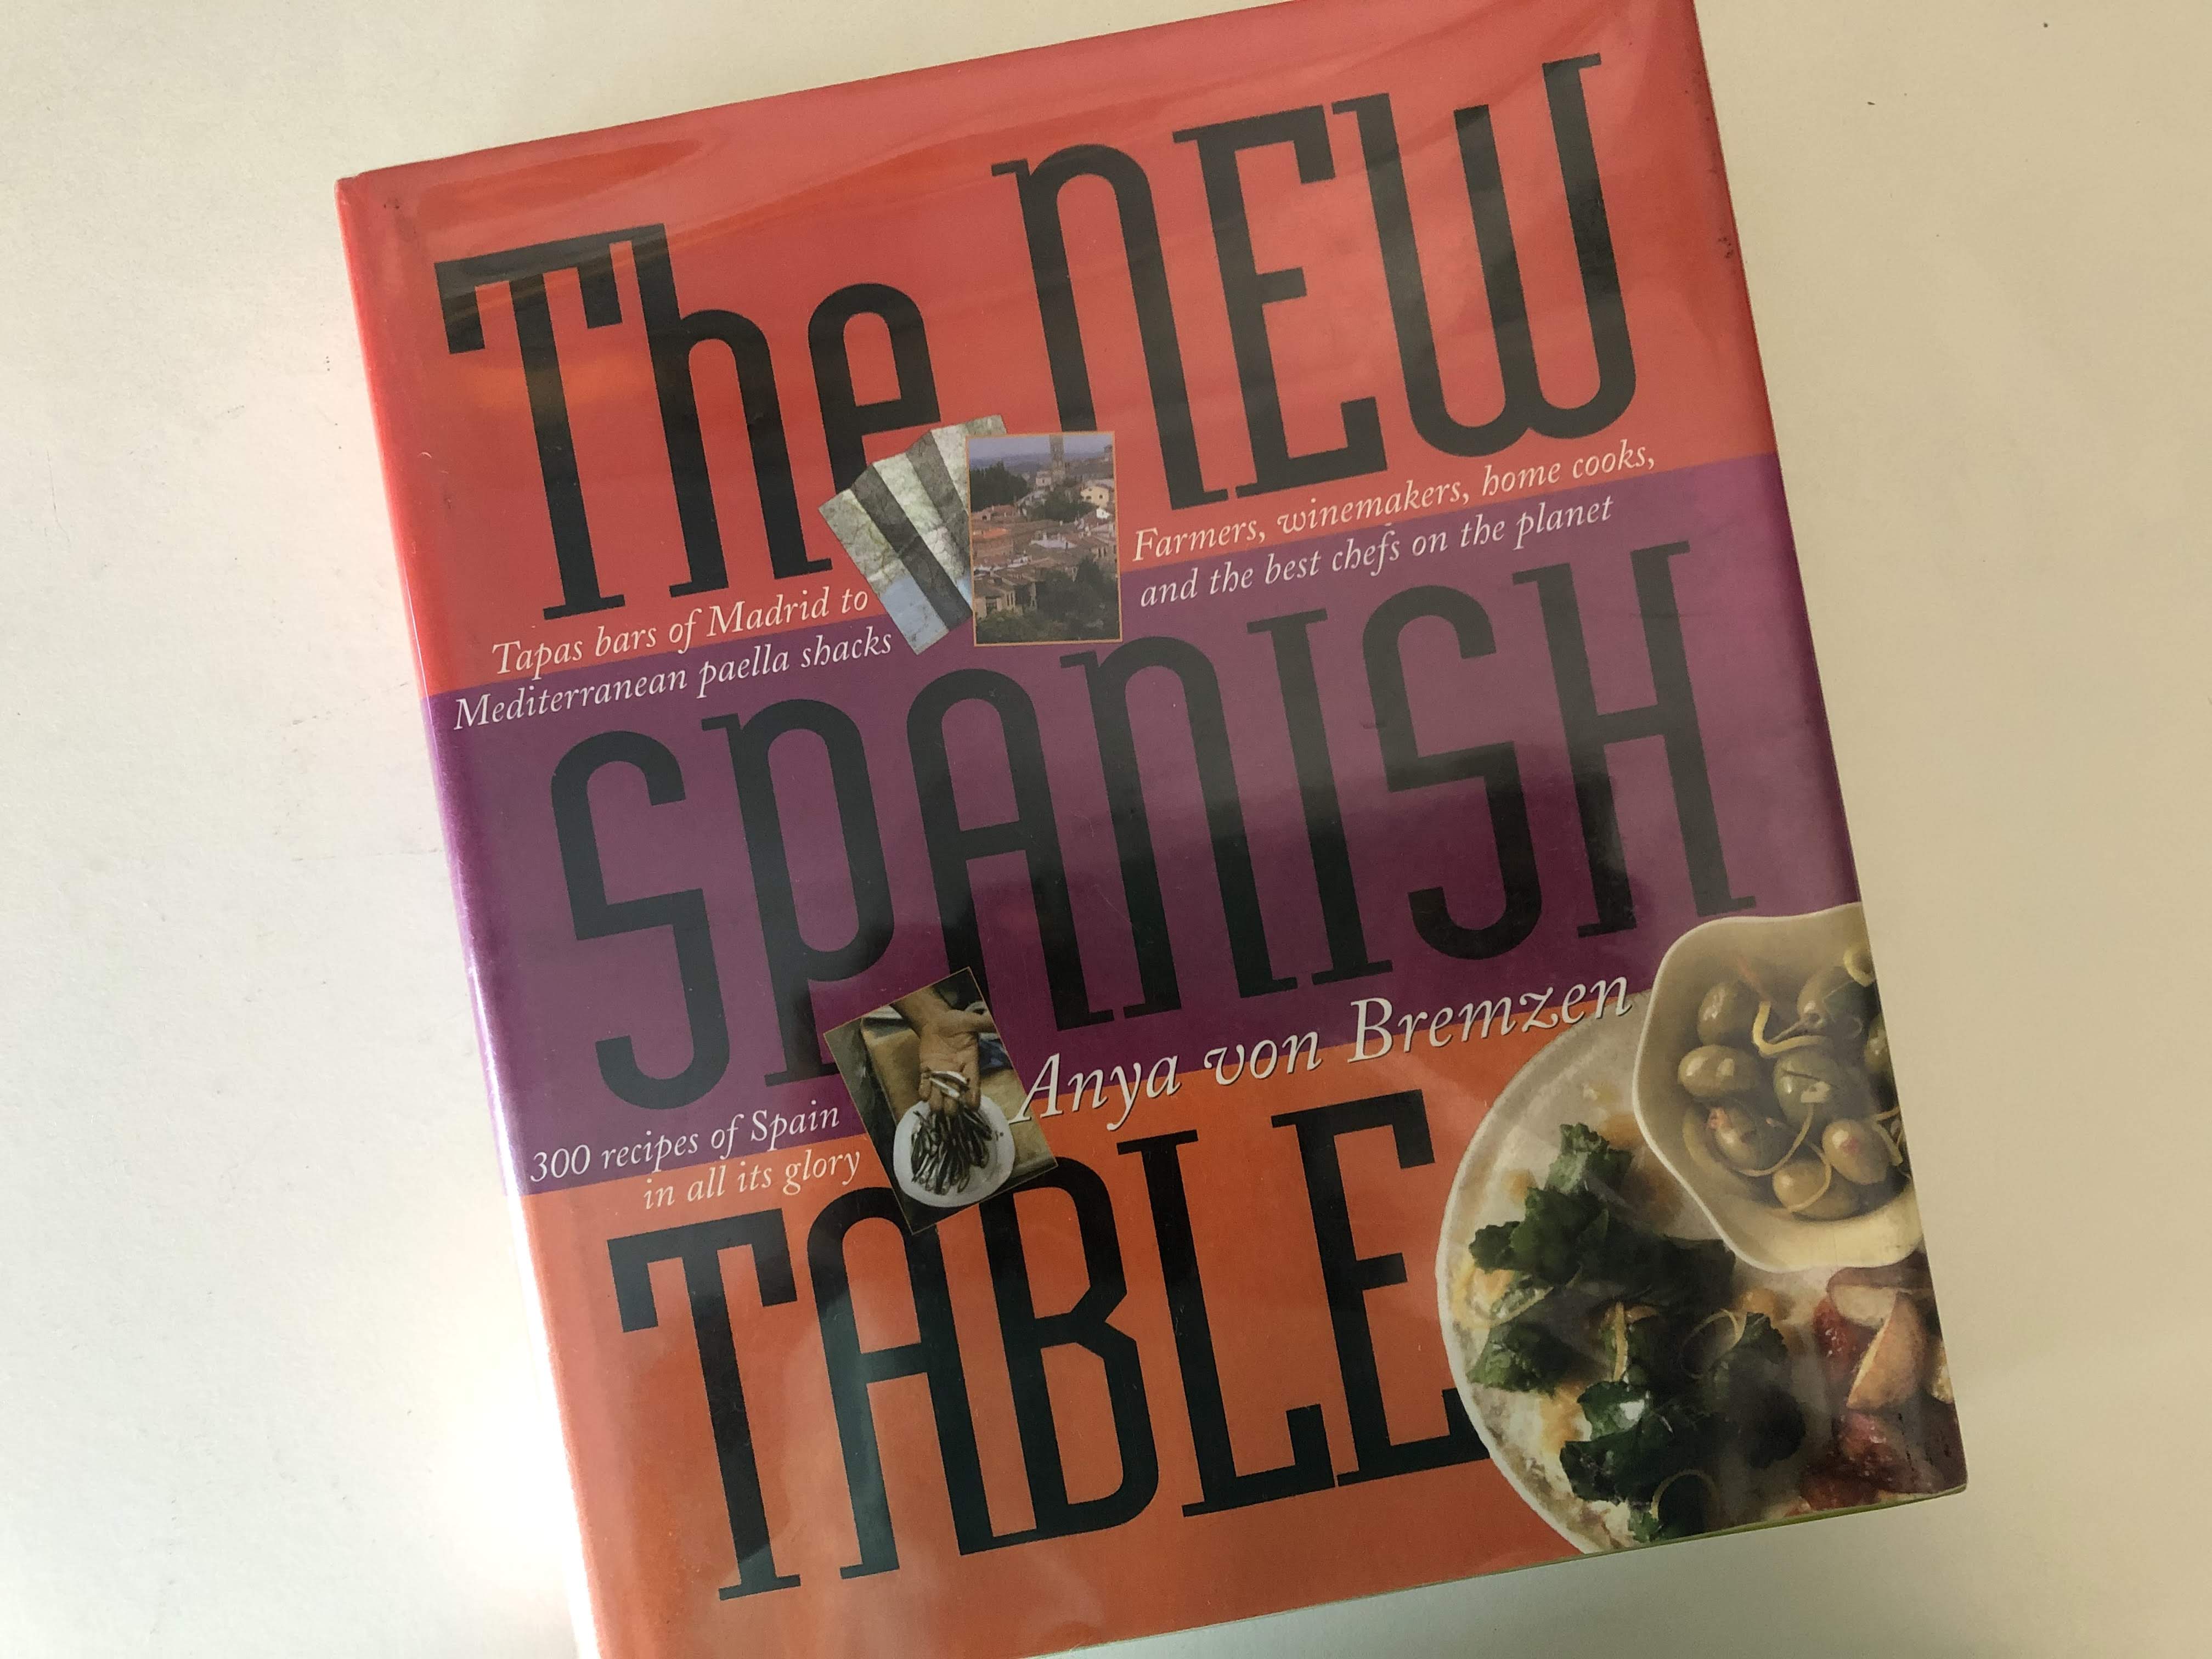 The New Spanish Table cookbook